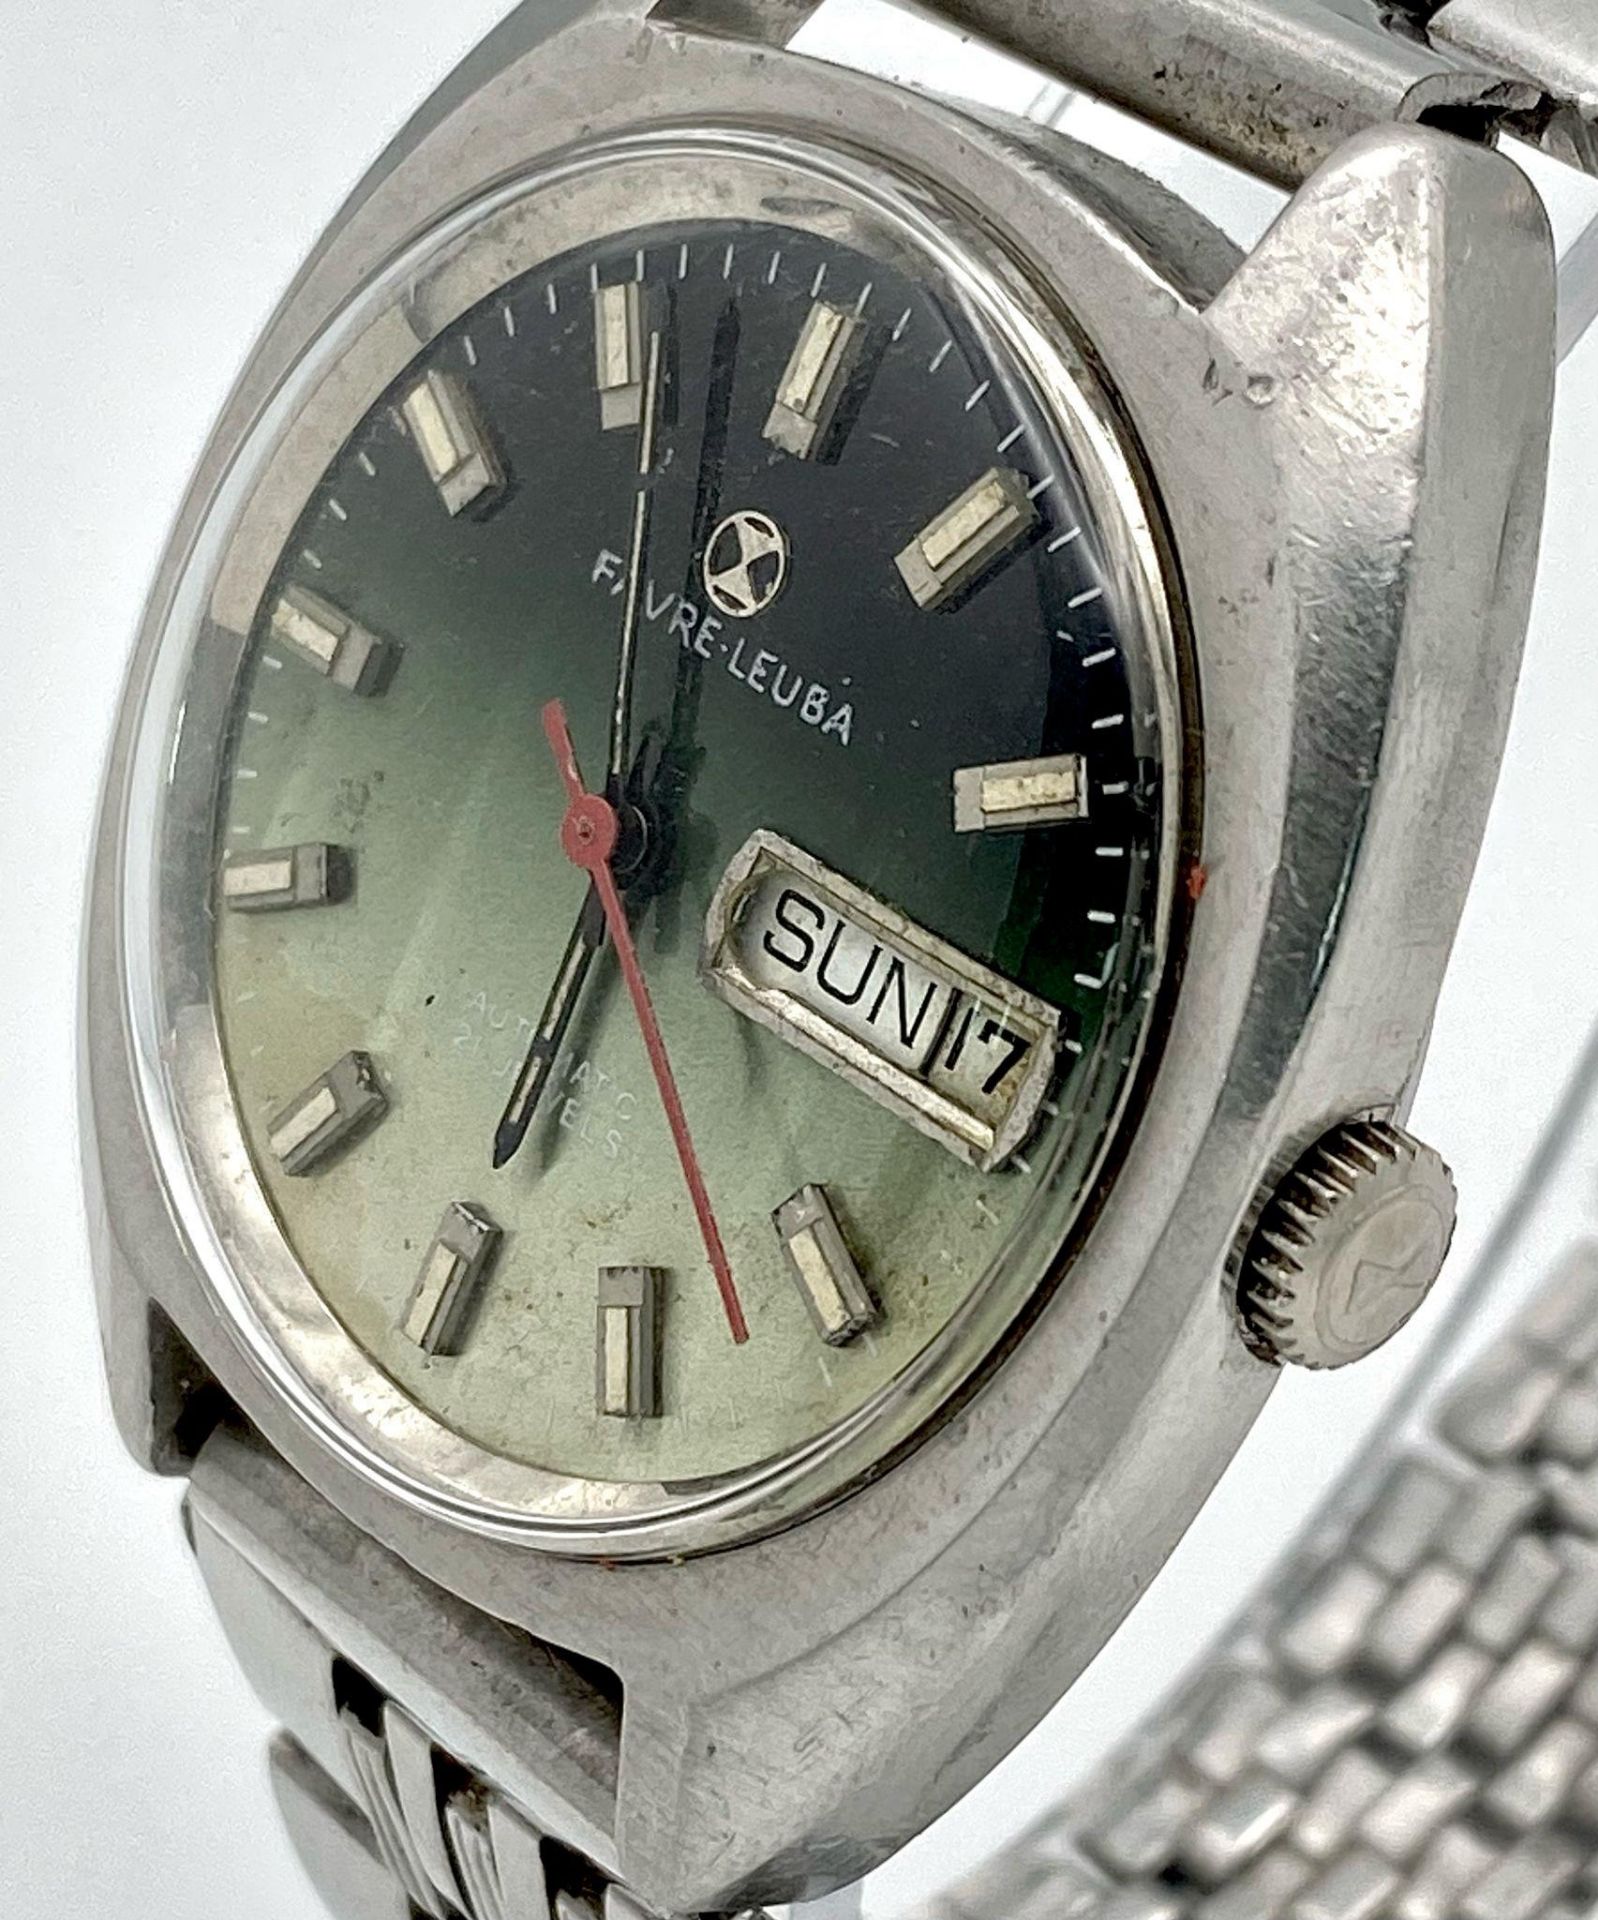 A Vintage Favre Leuba Automatic Gents Watch. Stainless steel bracelet and case - 37mm. Green dial - Image 3 of 6